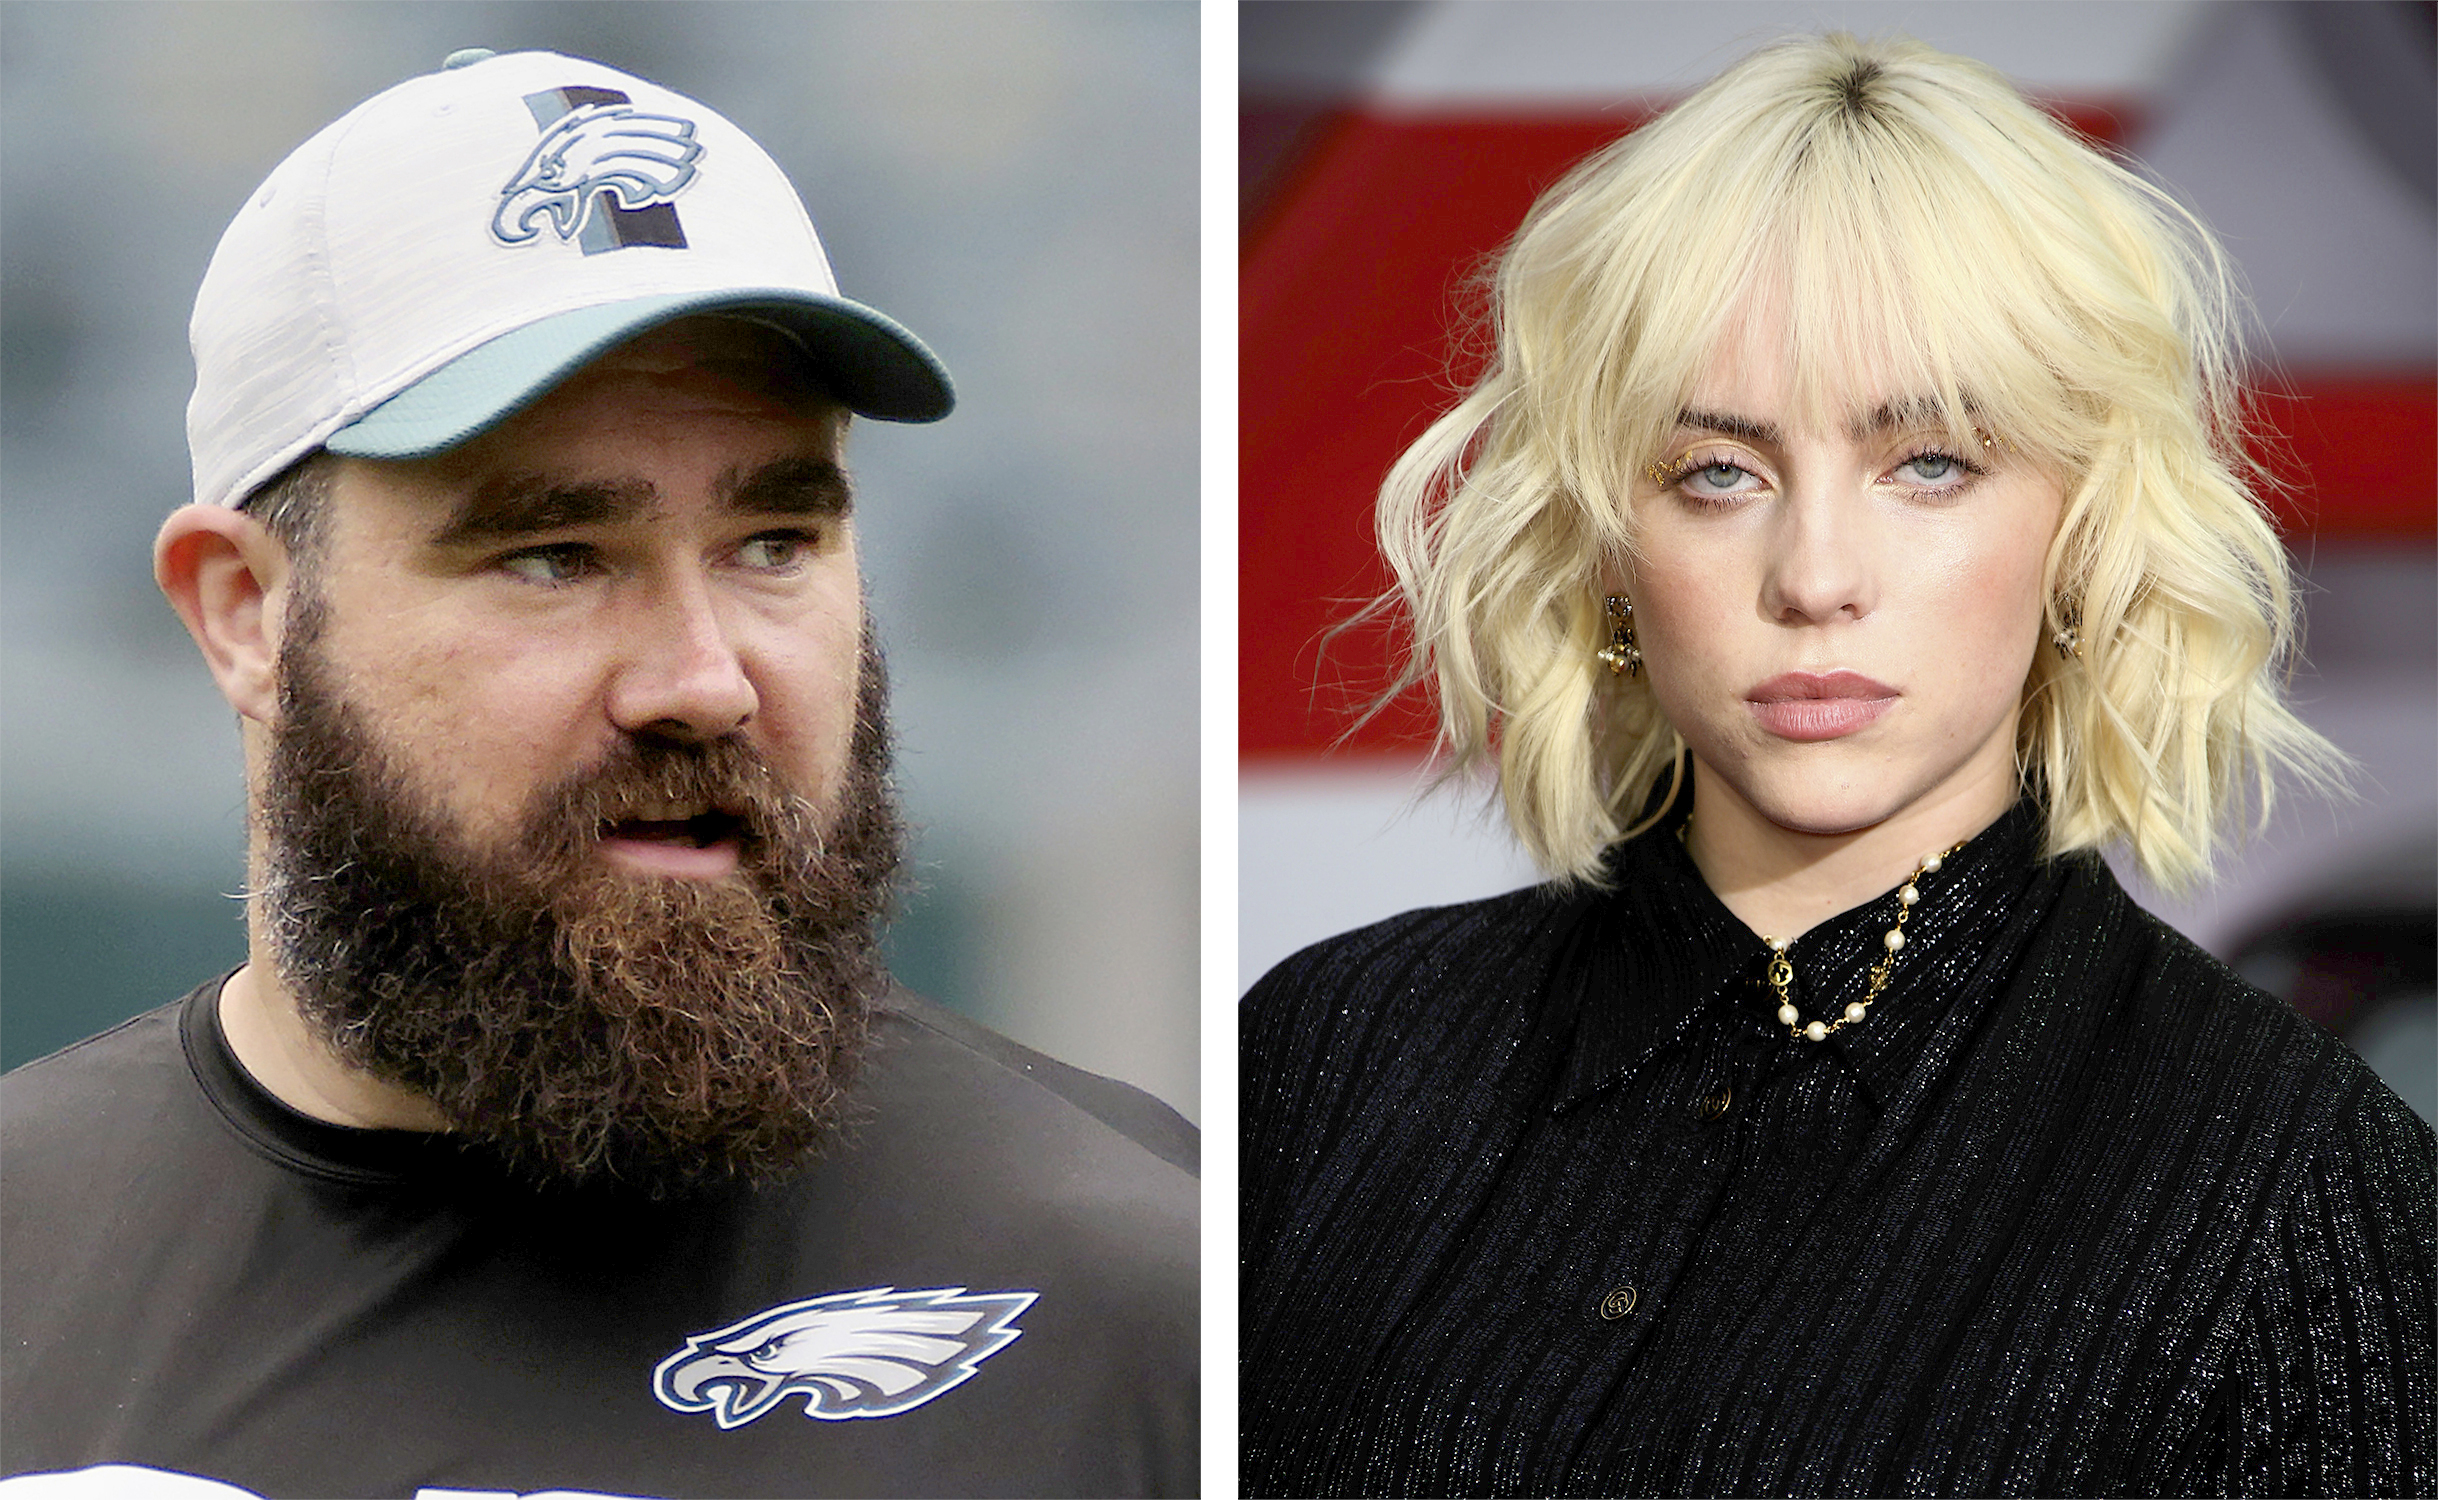 Philadelphia Eagles' Jason Kelce, left, and singer-songwriter Billie Eilish have something in common: broadcasters have difficulty pronouncing their names (Tim Tai/The Philadelphia Inquirer via AP, Pool, Joel C Ryan/Invision/AP)